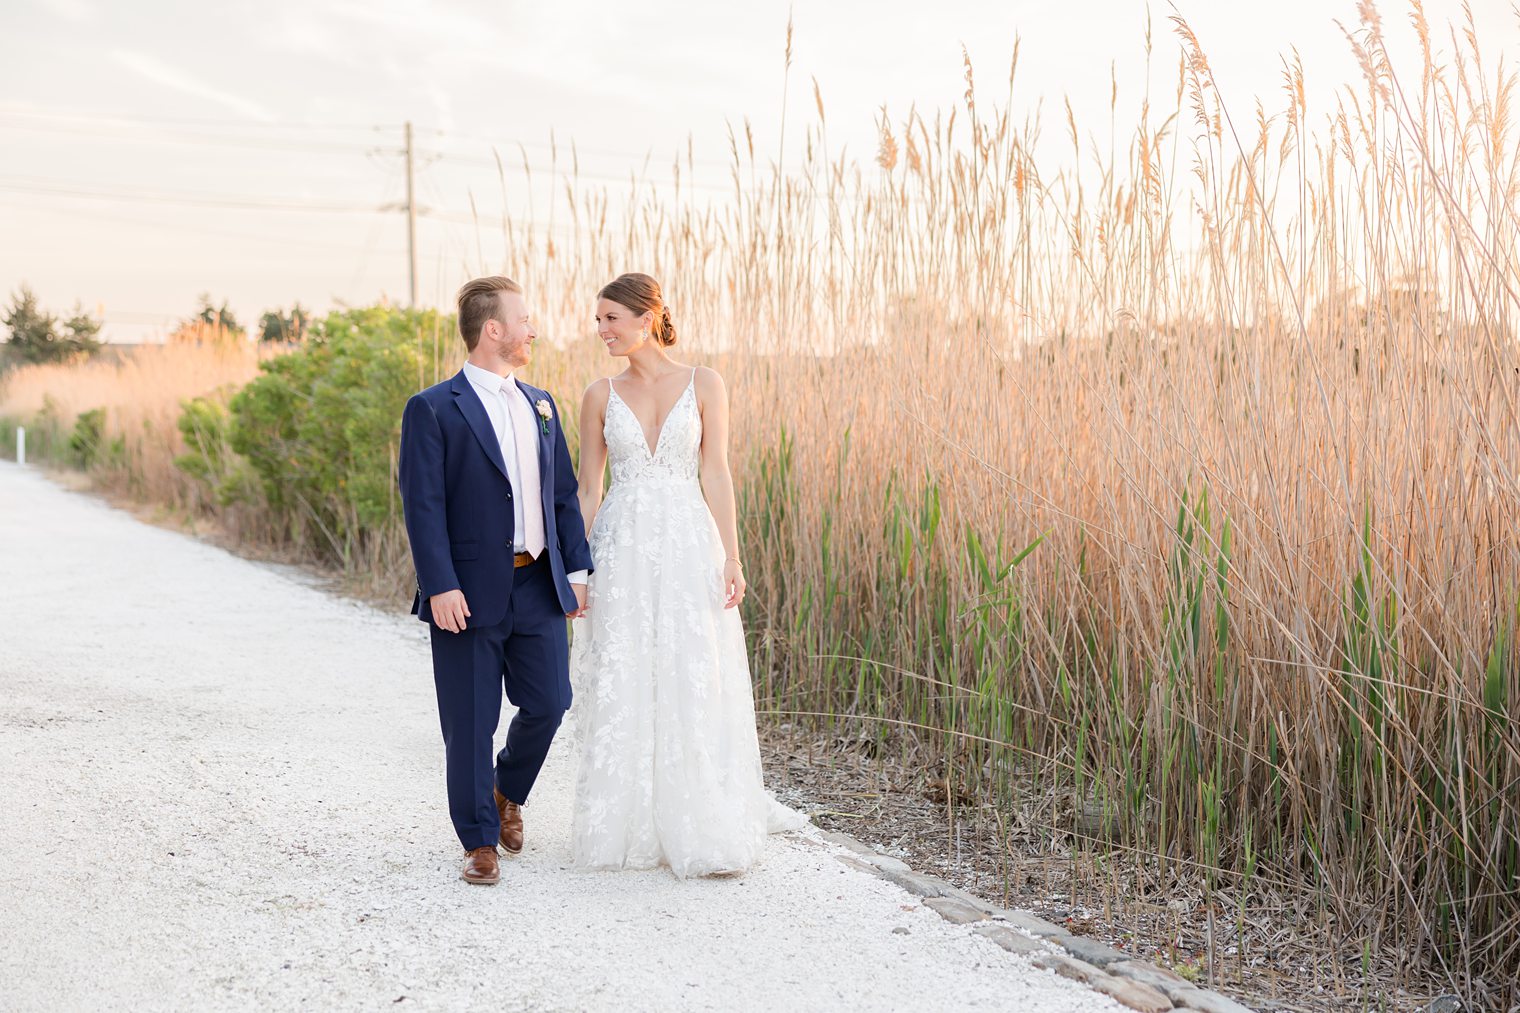 Mr and Mrs taking a walk to enjoy the sunset in their wedding day at Bonnet Island Estate